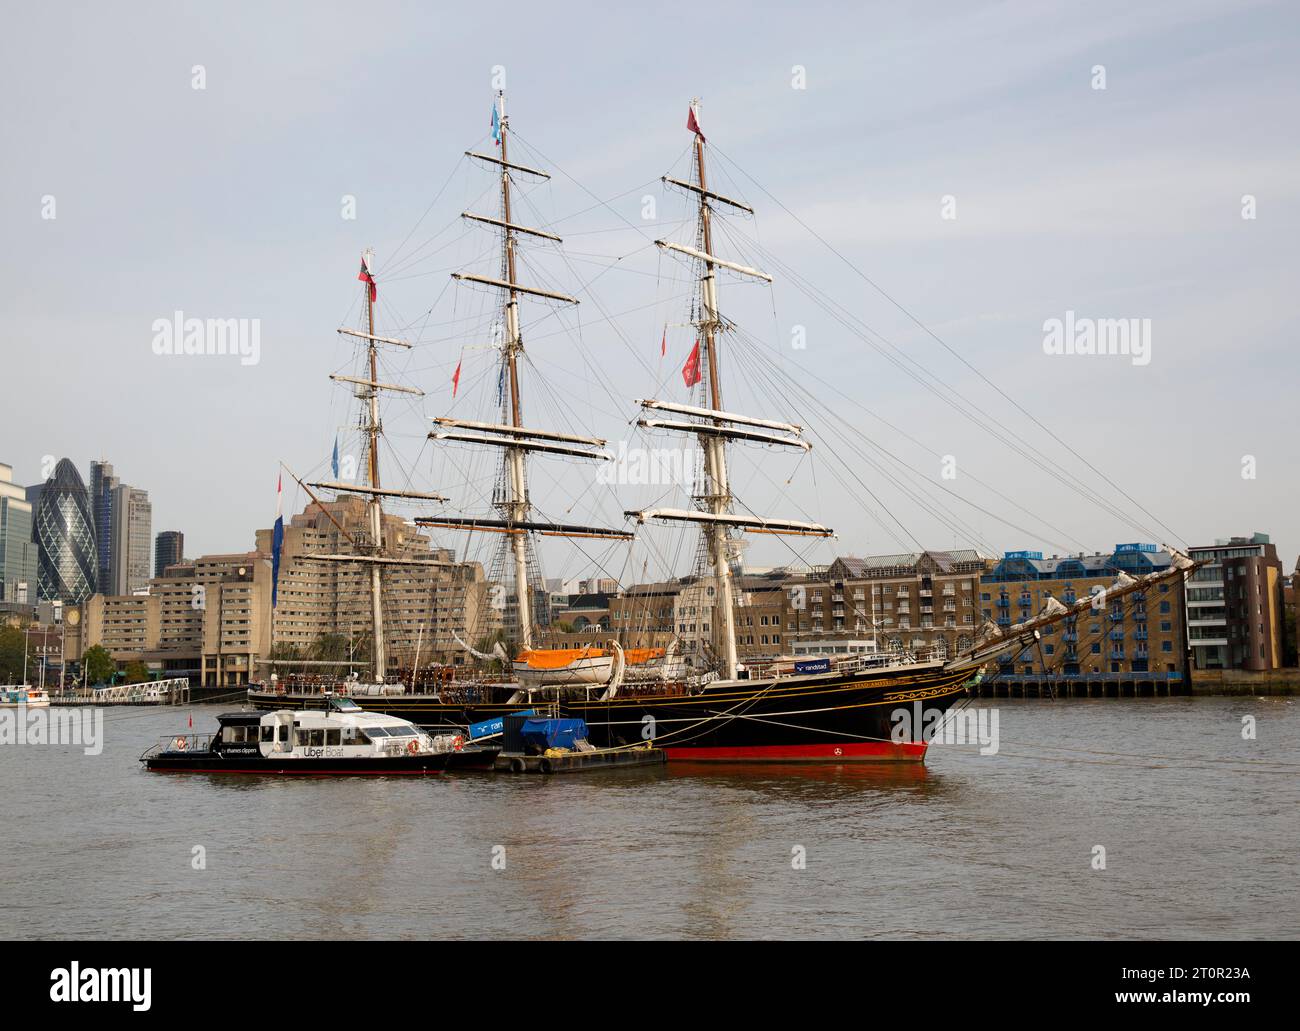 Three Masted Clipper Stad Amsterdam River Thames City of London England Stock Photo